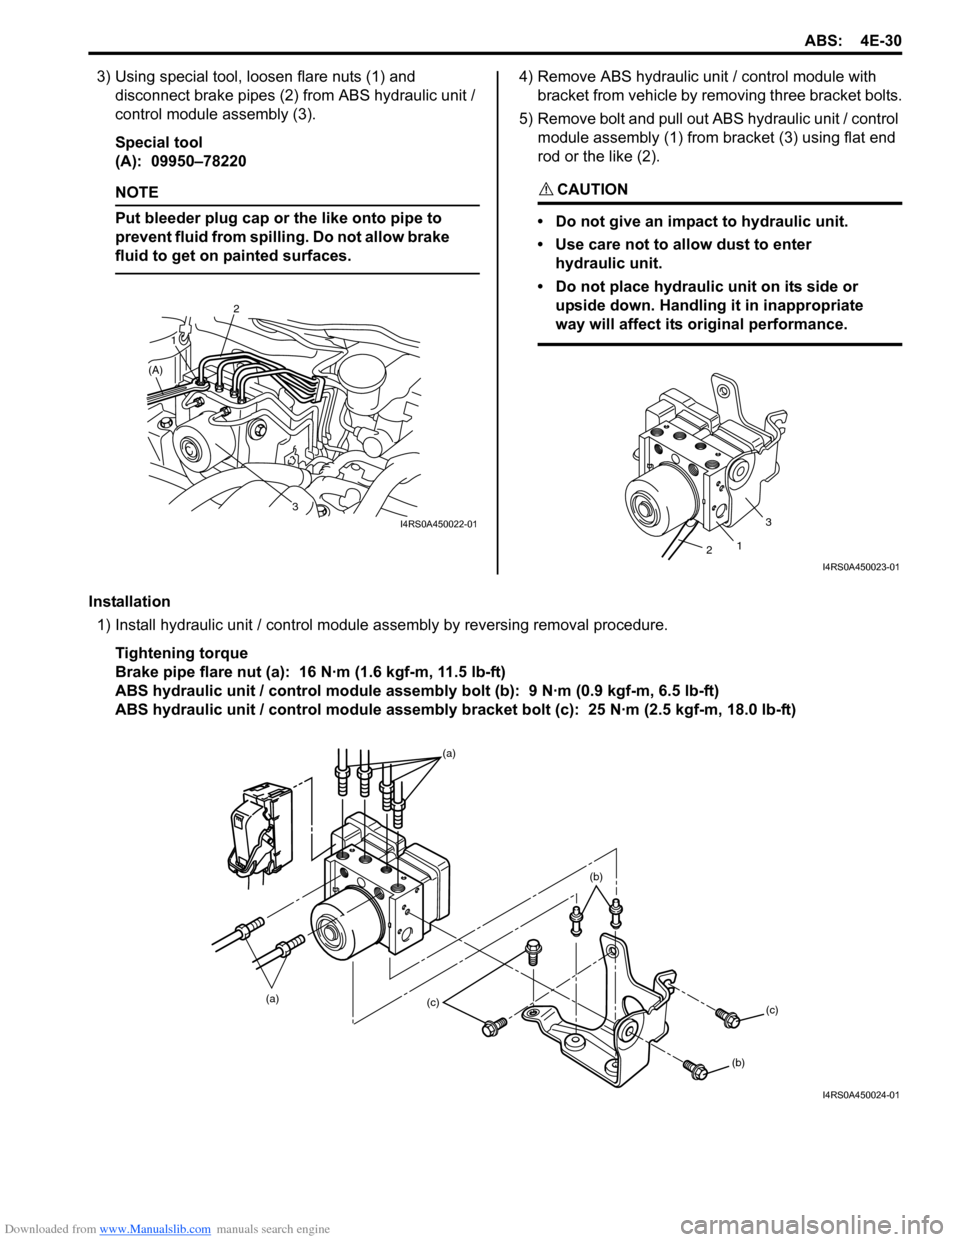 SUZUKI SWIFT 2007 2.G Service Service Manual Downloaded from www.Manualslib.com manuals search engine ABS: 4E-30
3) Using special tool, loosen flare nuts (1) and disconnect brake pipes (2) from ABS hydraulic unit / 
control module assembly (3).
